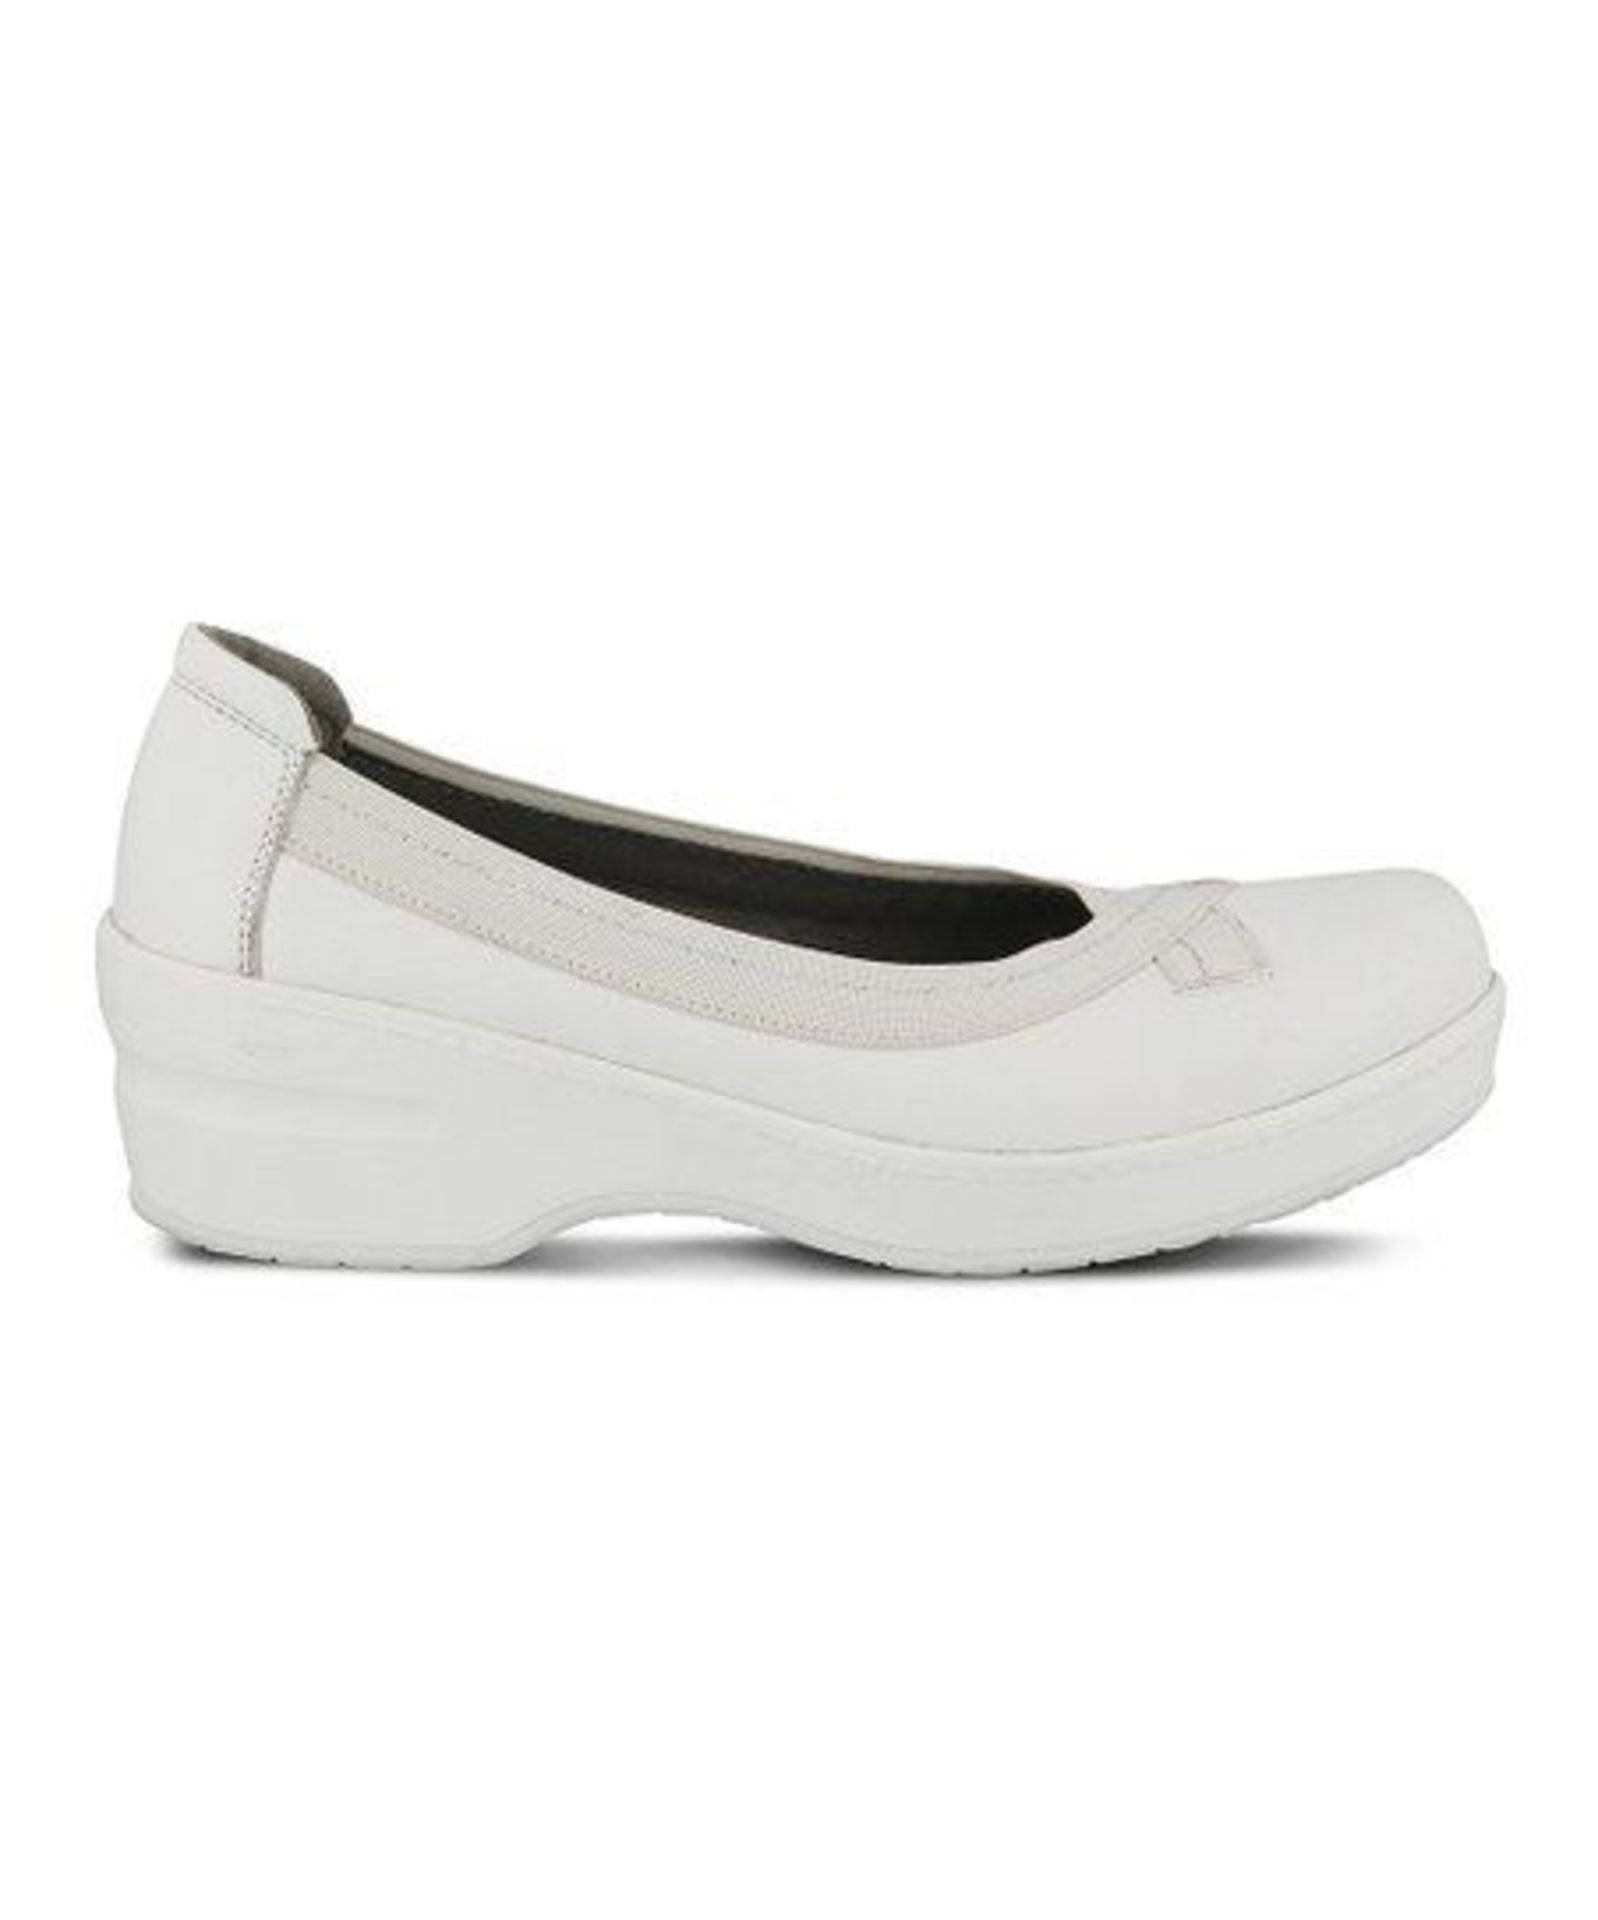 Spring Step Professional, White Belabank Leather Flat, Size Uk 6-6.5W Us 8.5 (New With Box) [Ref: - Image 2 of 4